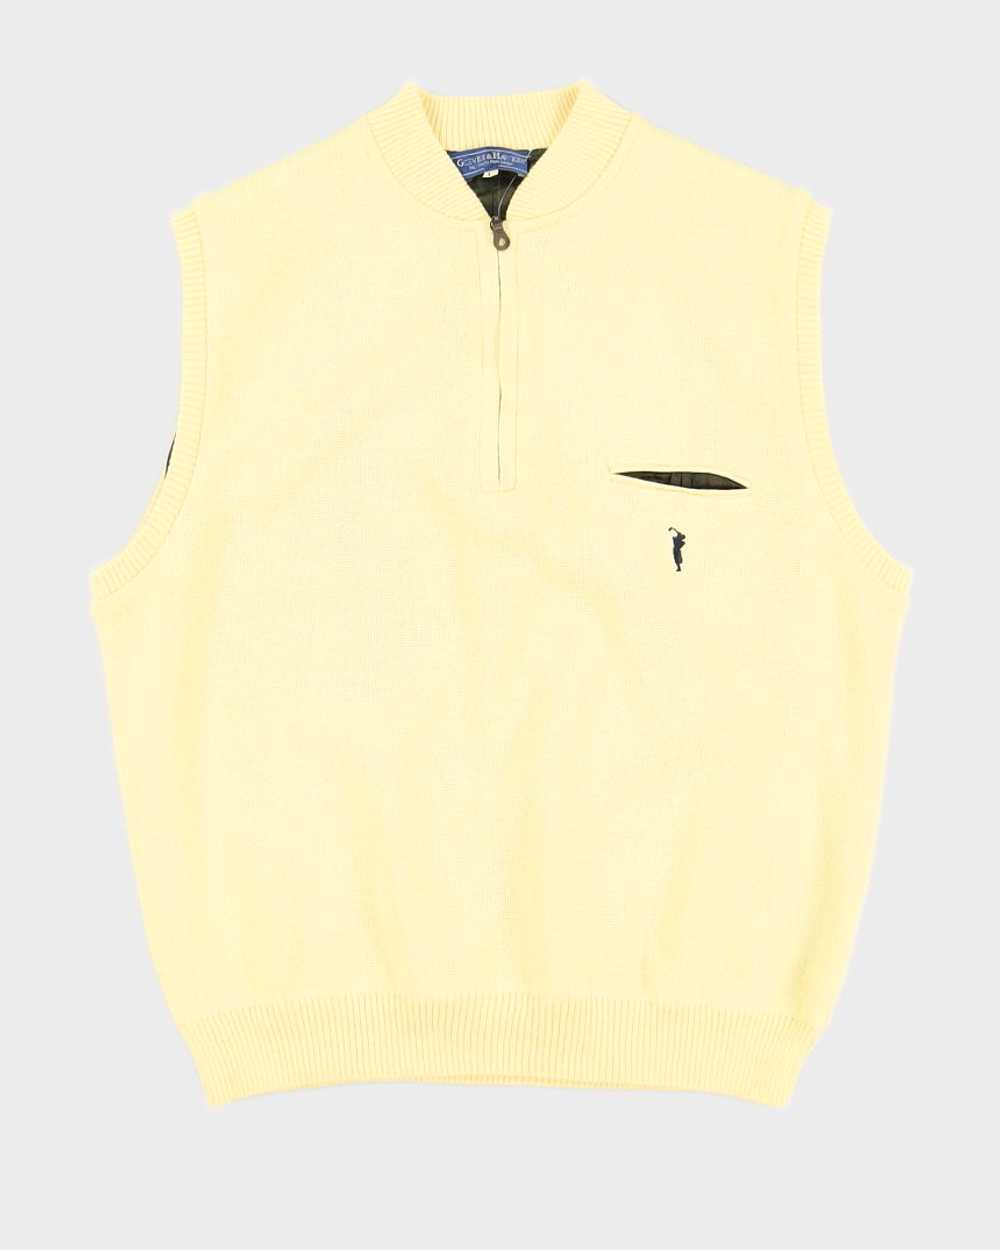 Gieves and Hawkes Yellow Golf Sweater Vest - L - image 1